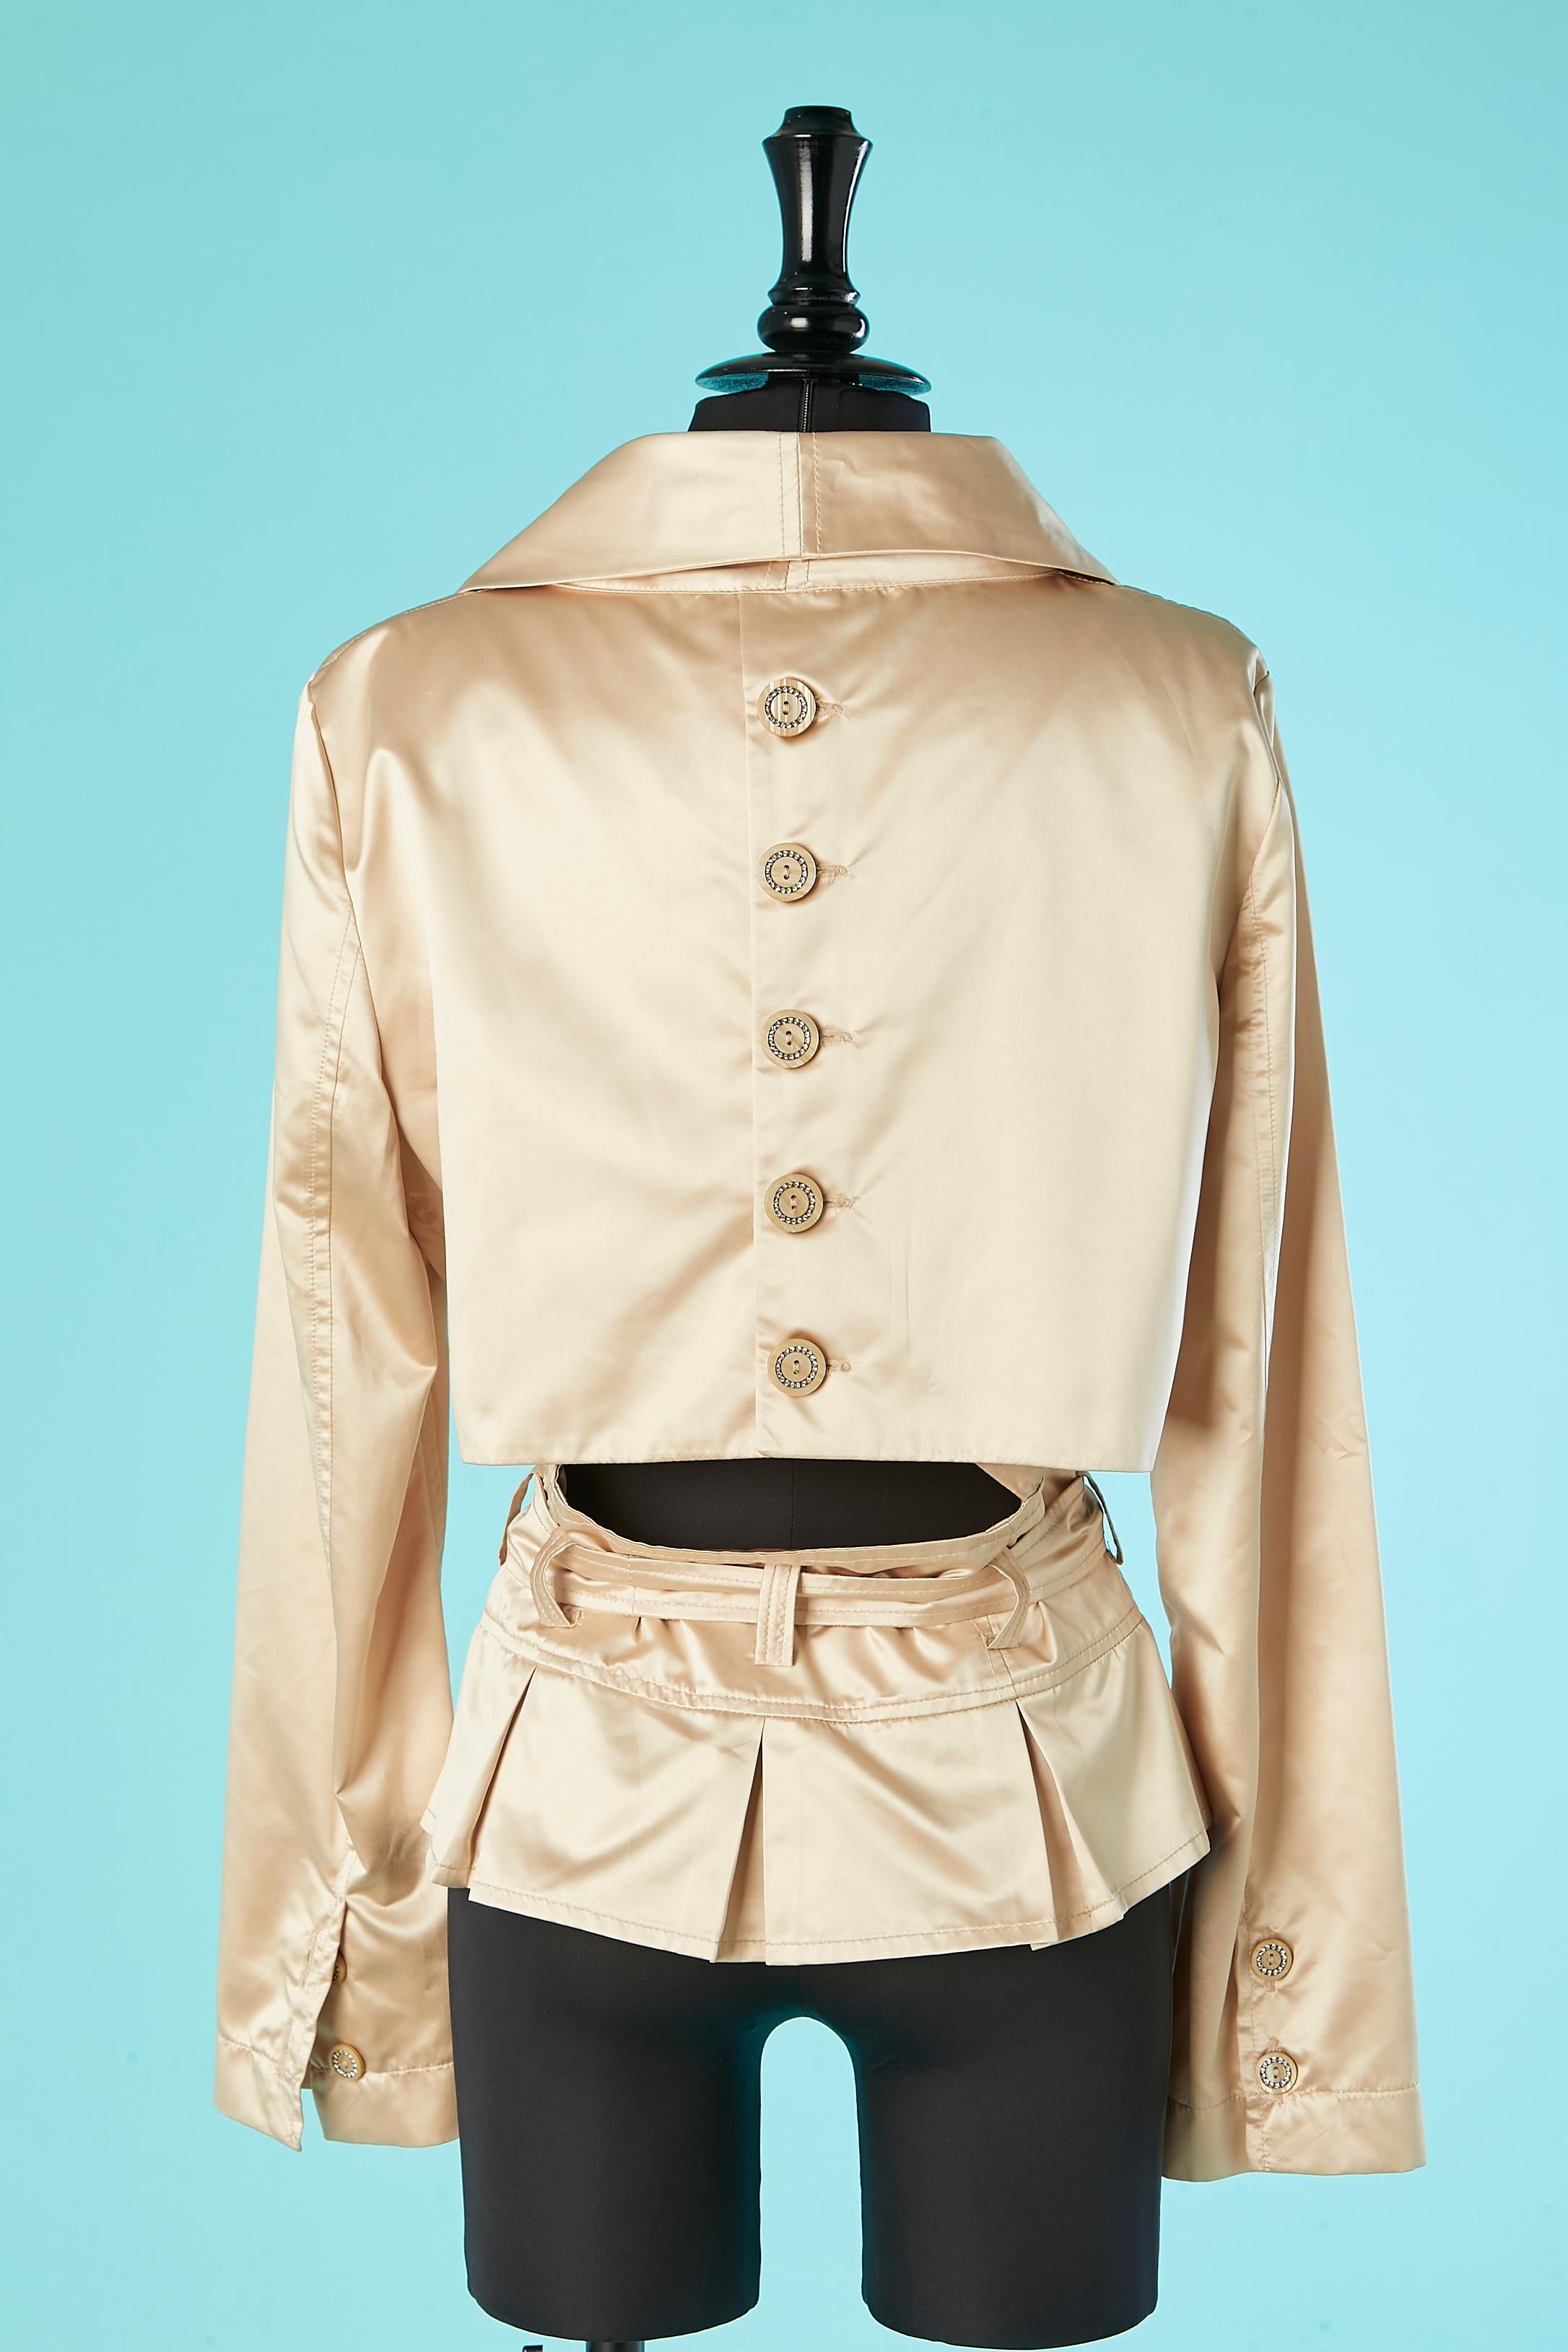 Champagne satin jacket with belt and rhinestone buttons JIKI Monté-Carlo  For Sale 1